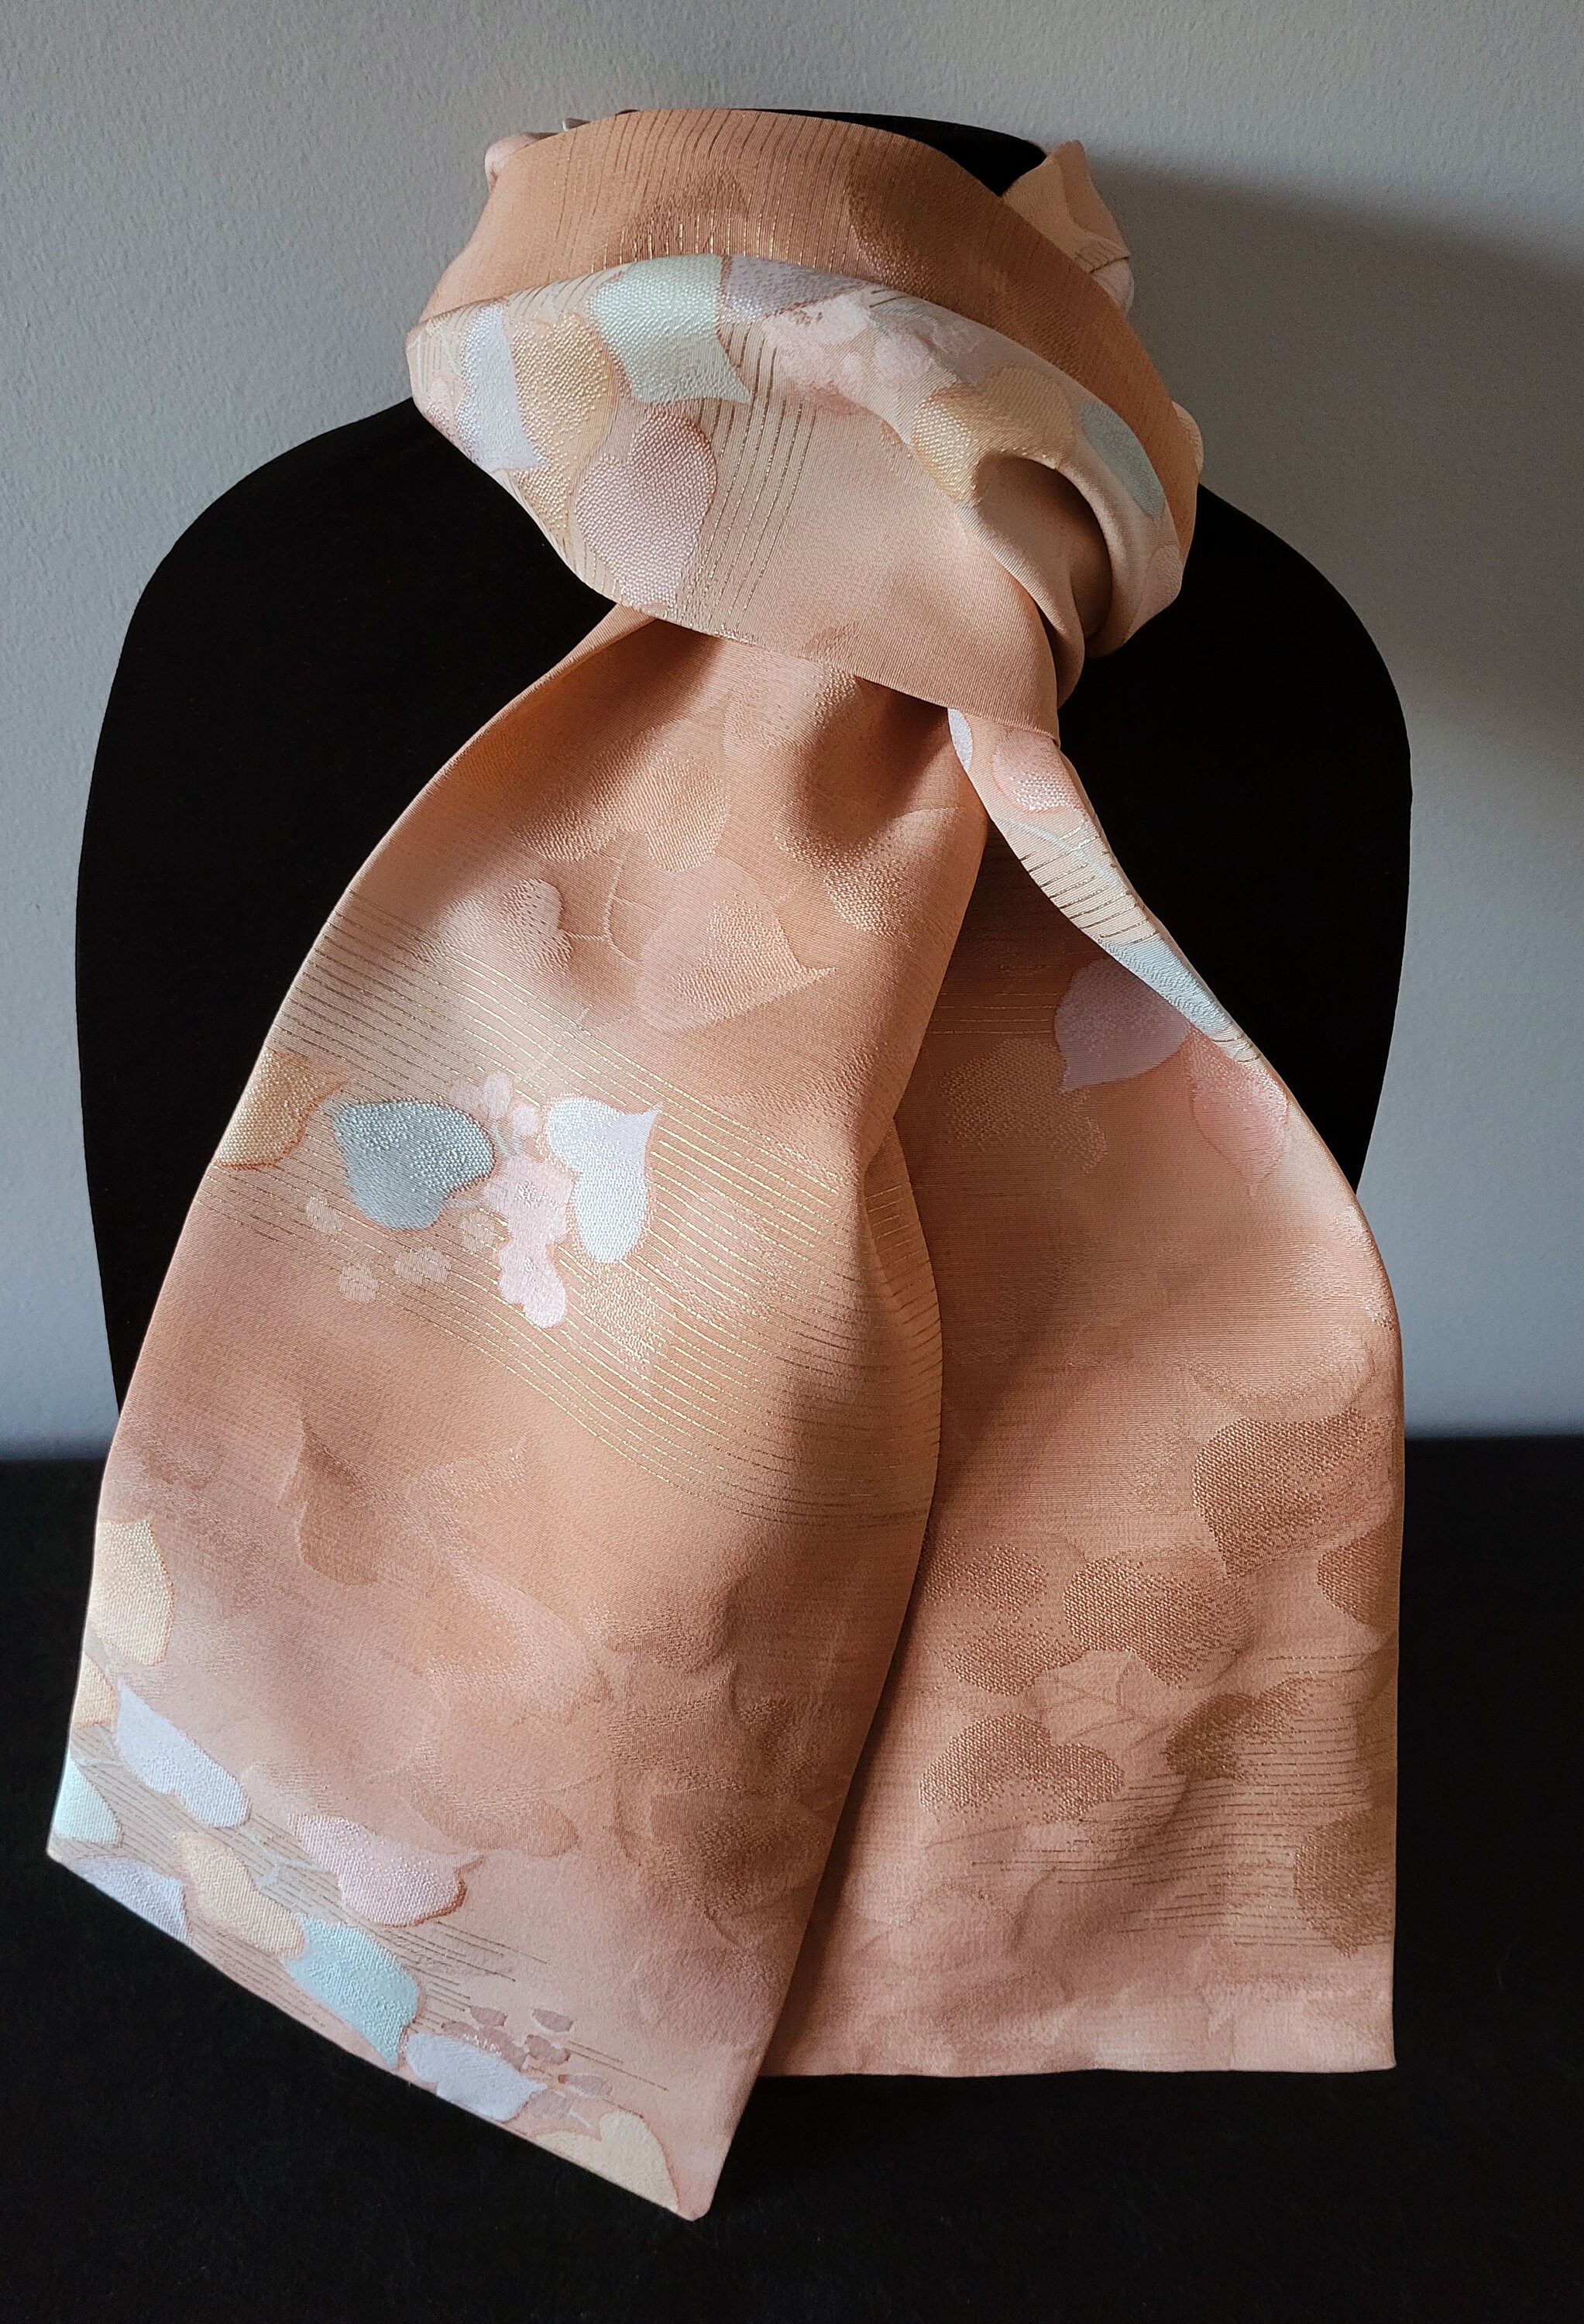 Muted Sunset Eco Printed Silk Scarf